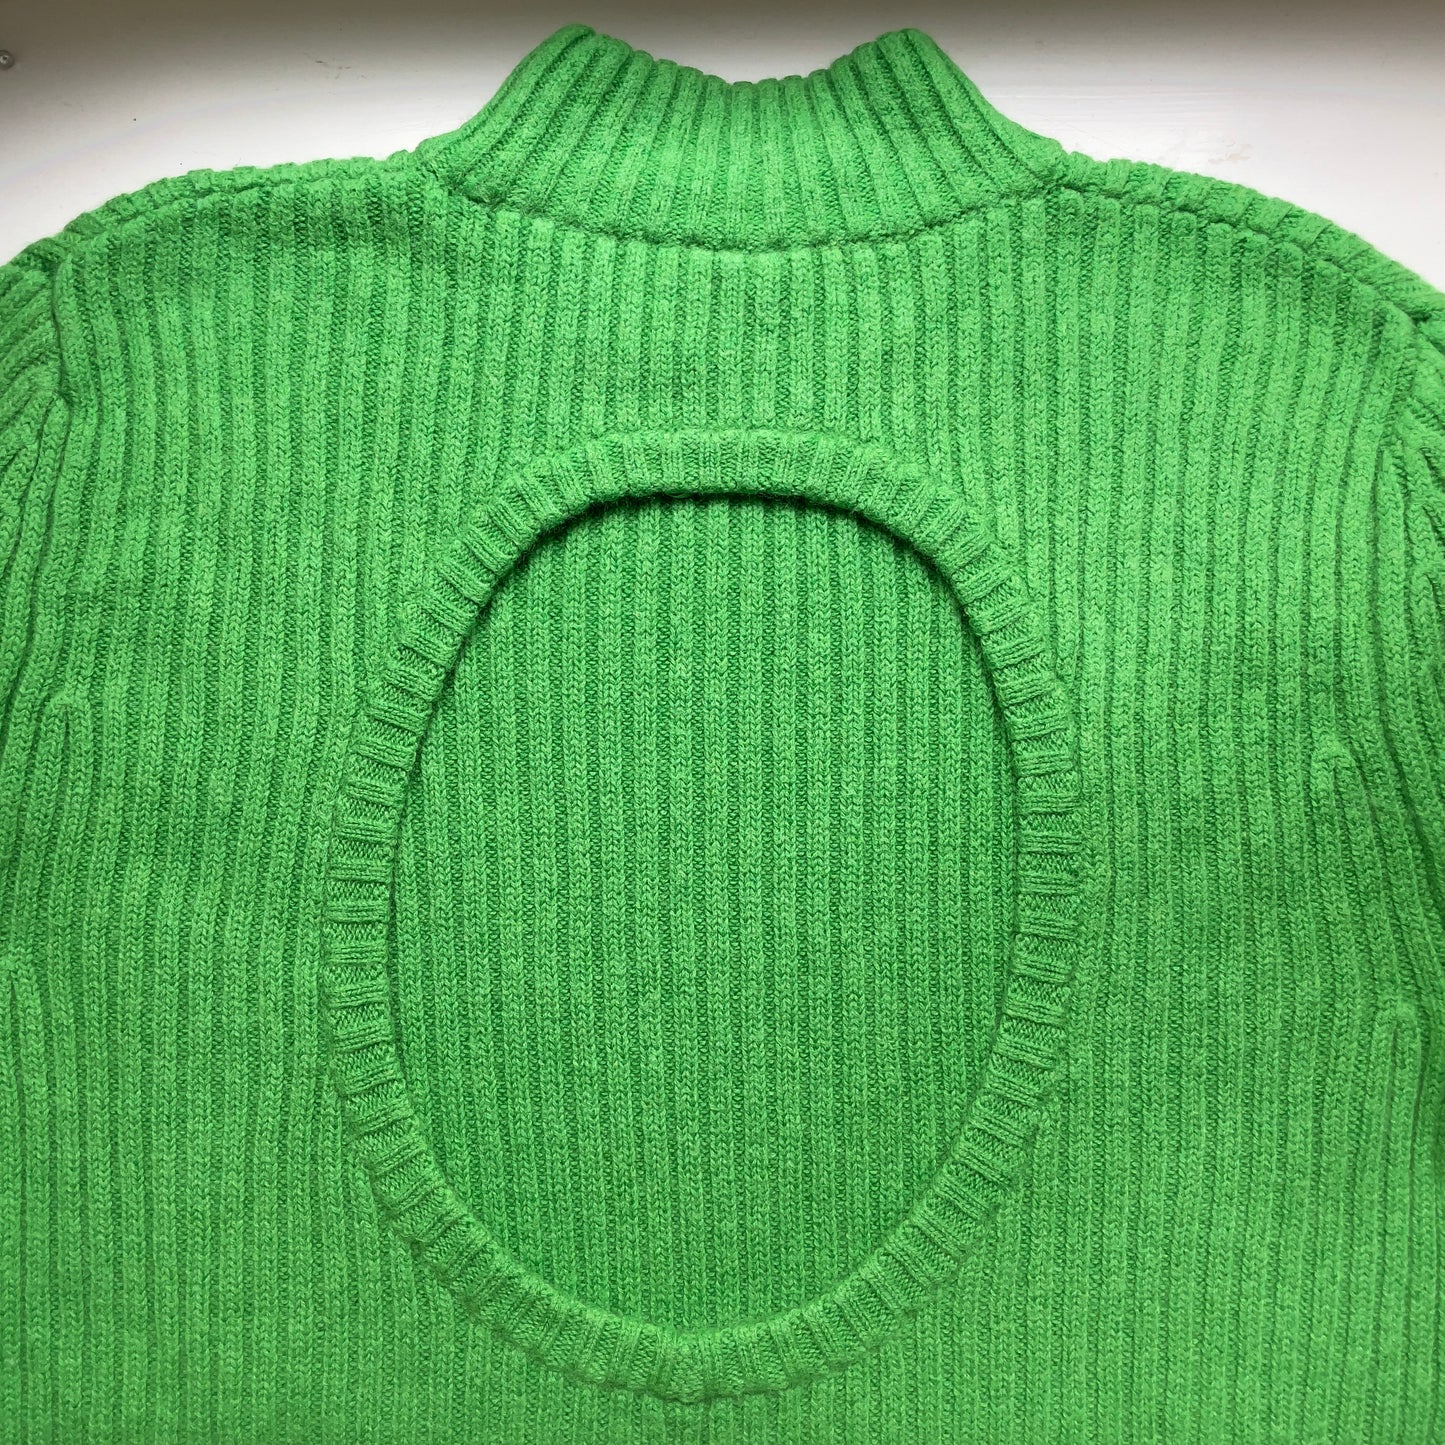 Green Cashmere Wool Blend Sweater - Topshop Boutique - Back Cut Out Detail